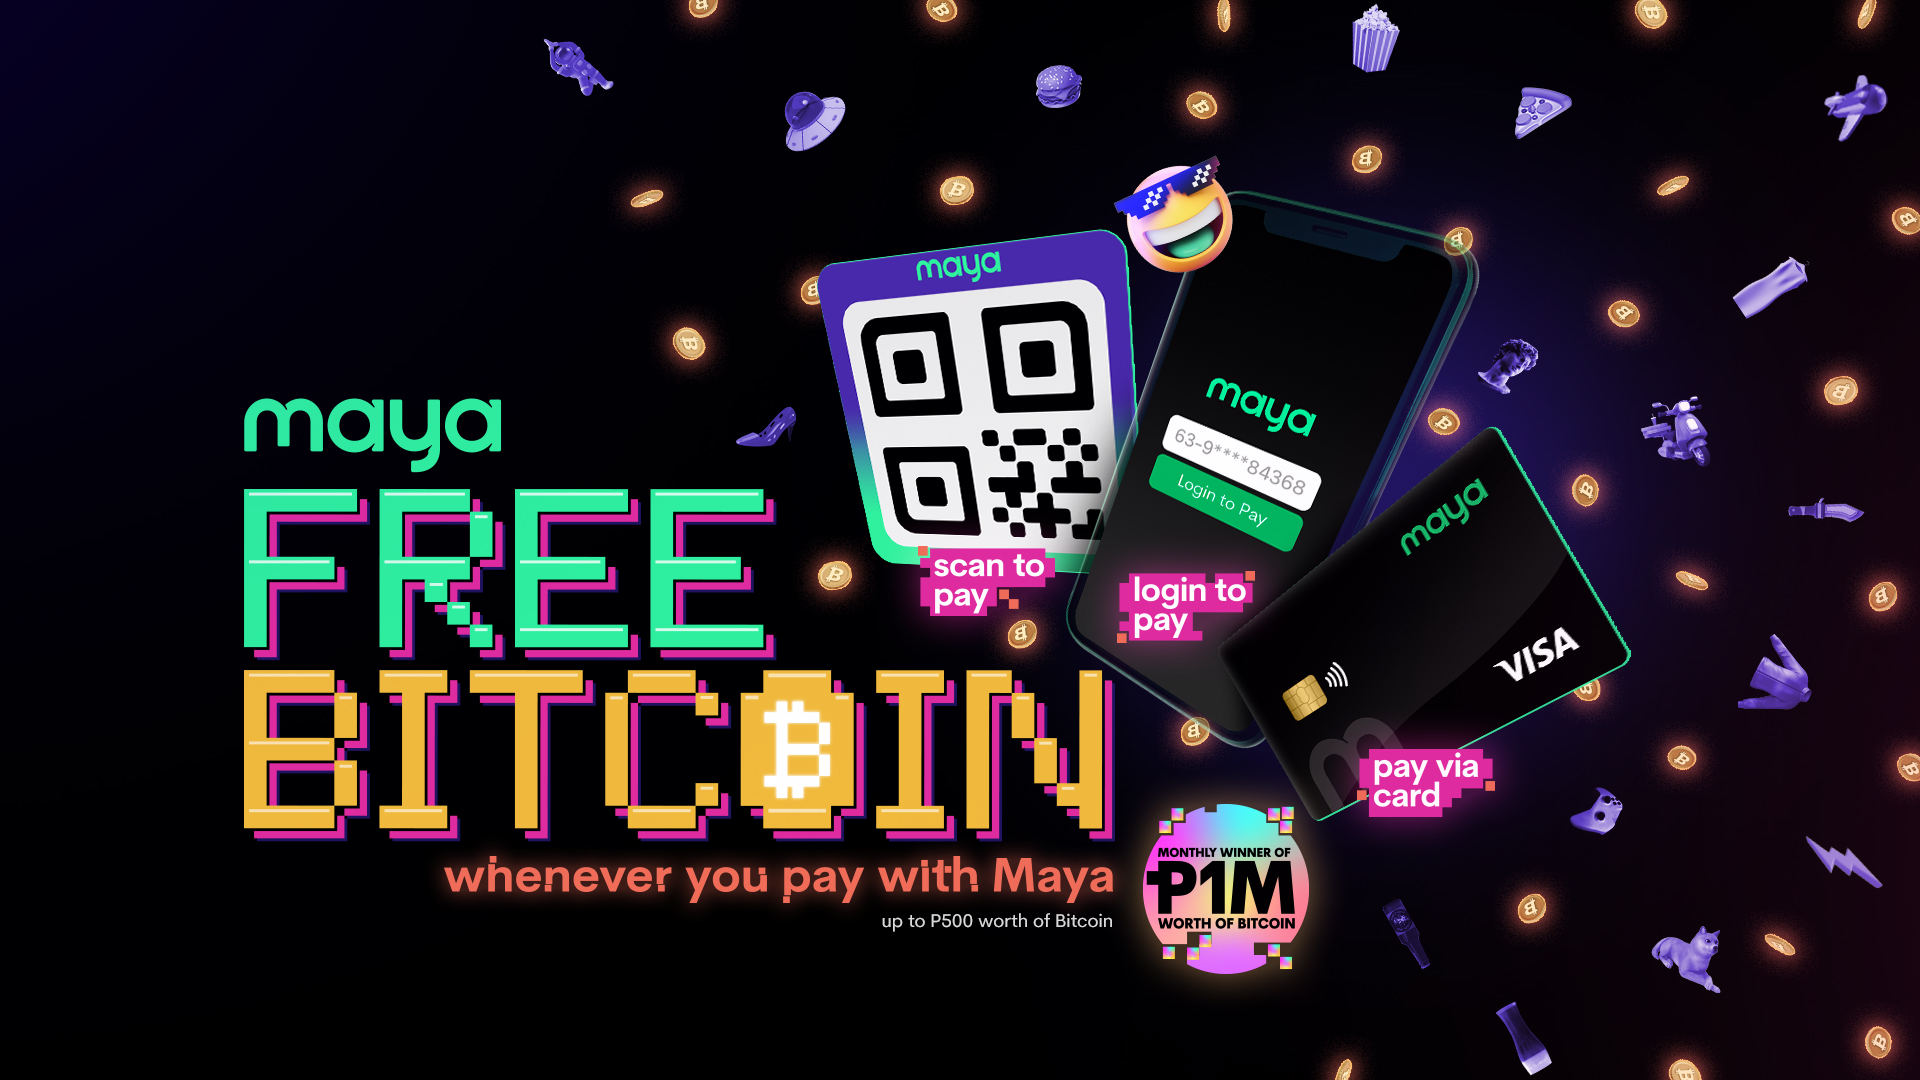 FREE BITCOIN every time you pay with Maya via Number, Card or QR!